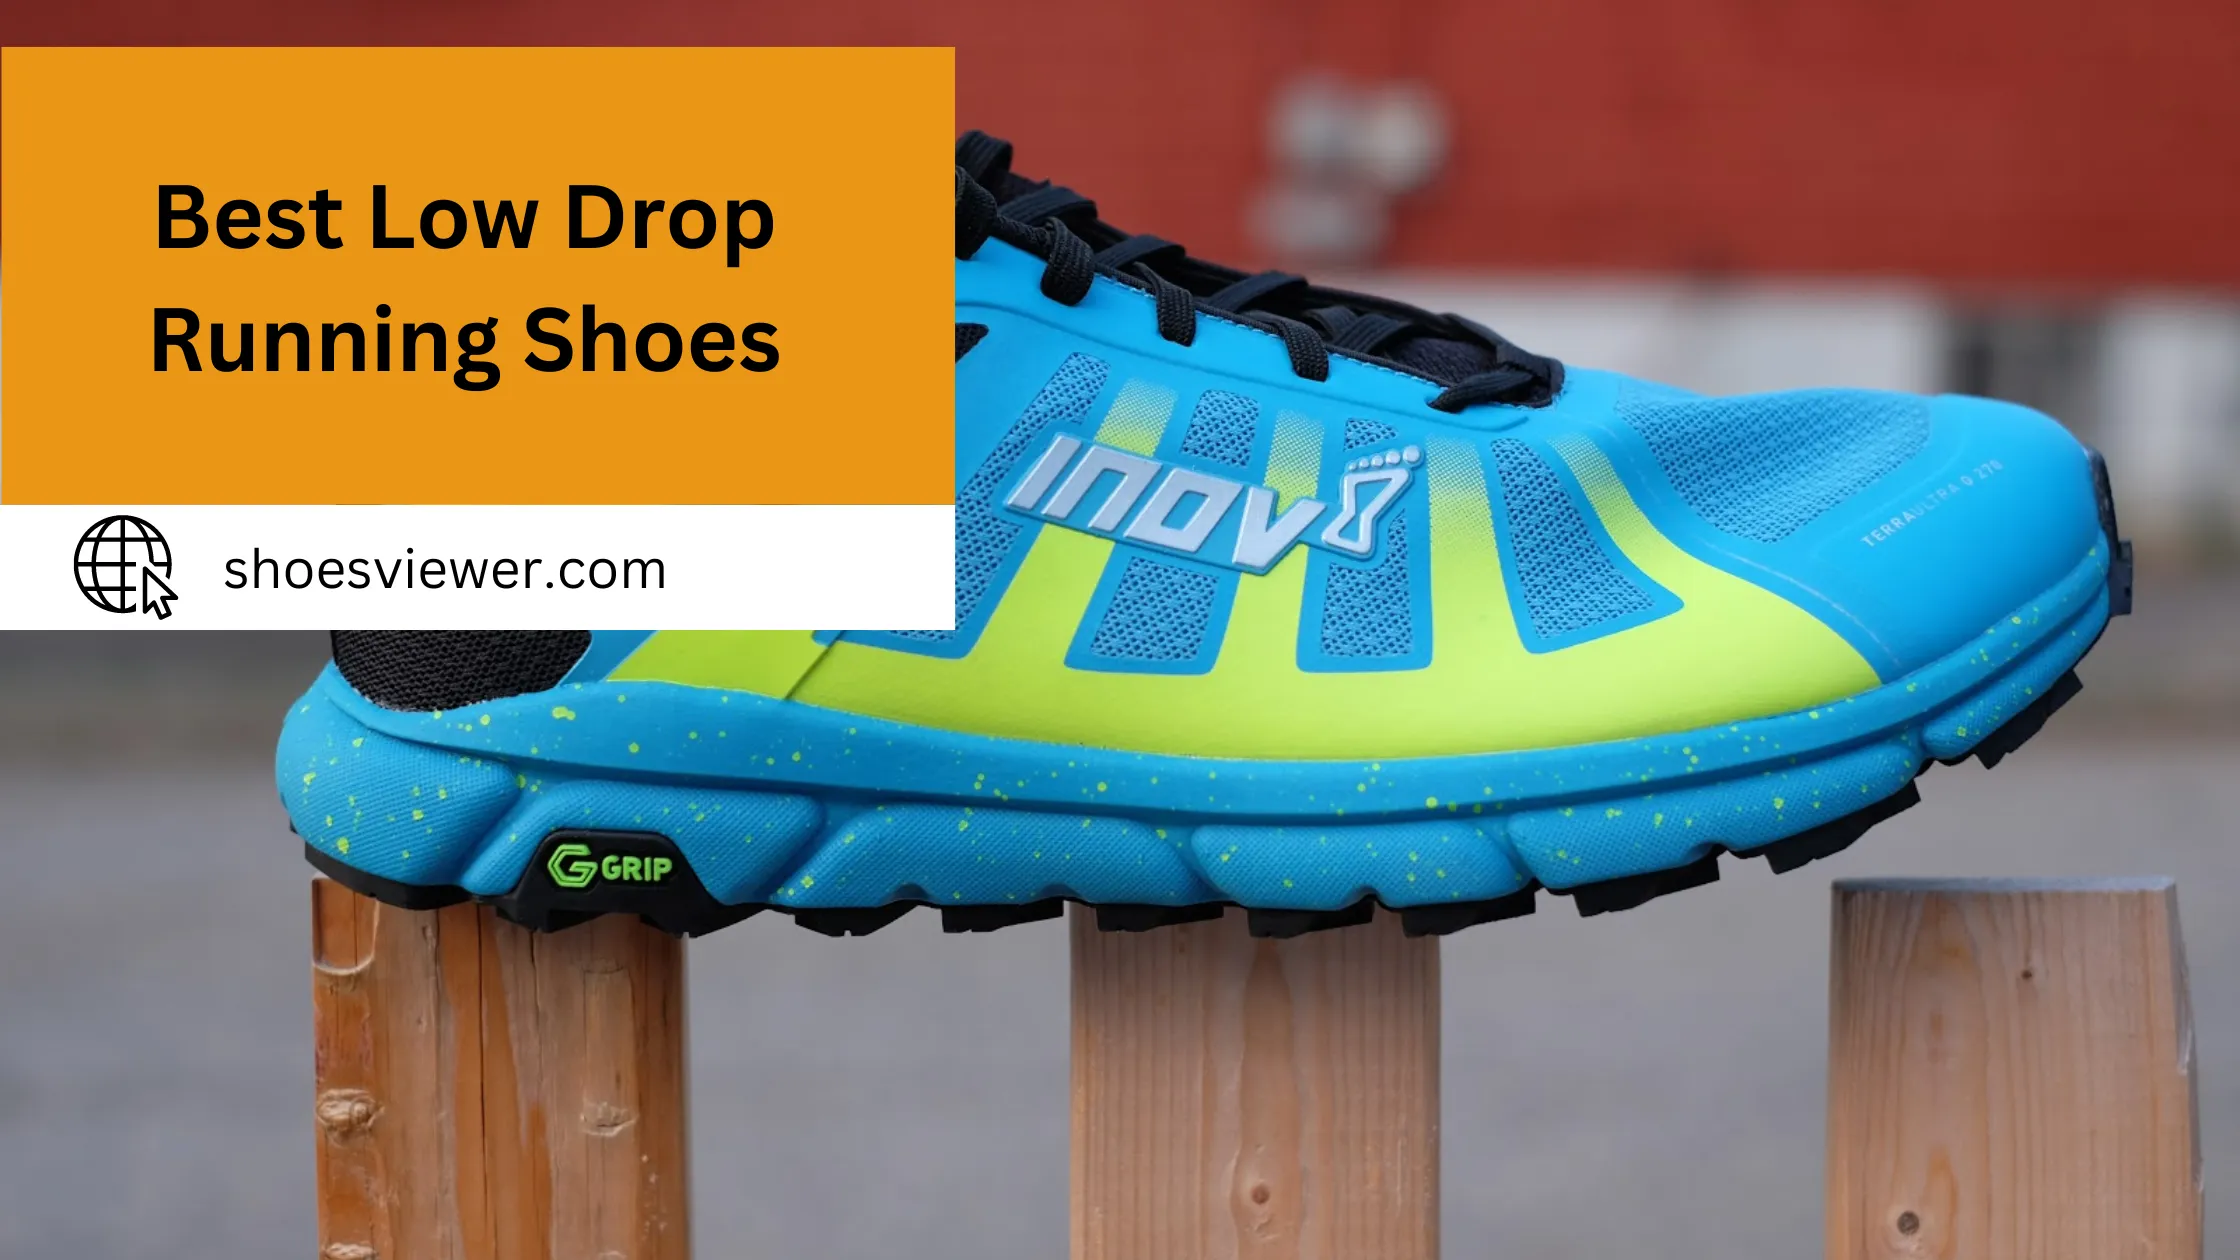 Best Low Drop Running Shoes - A Comprehensive Guide